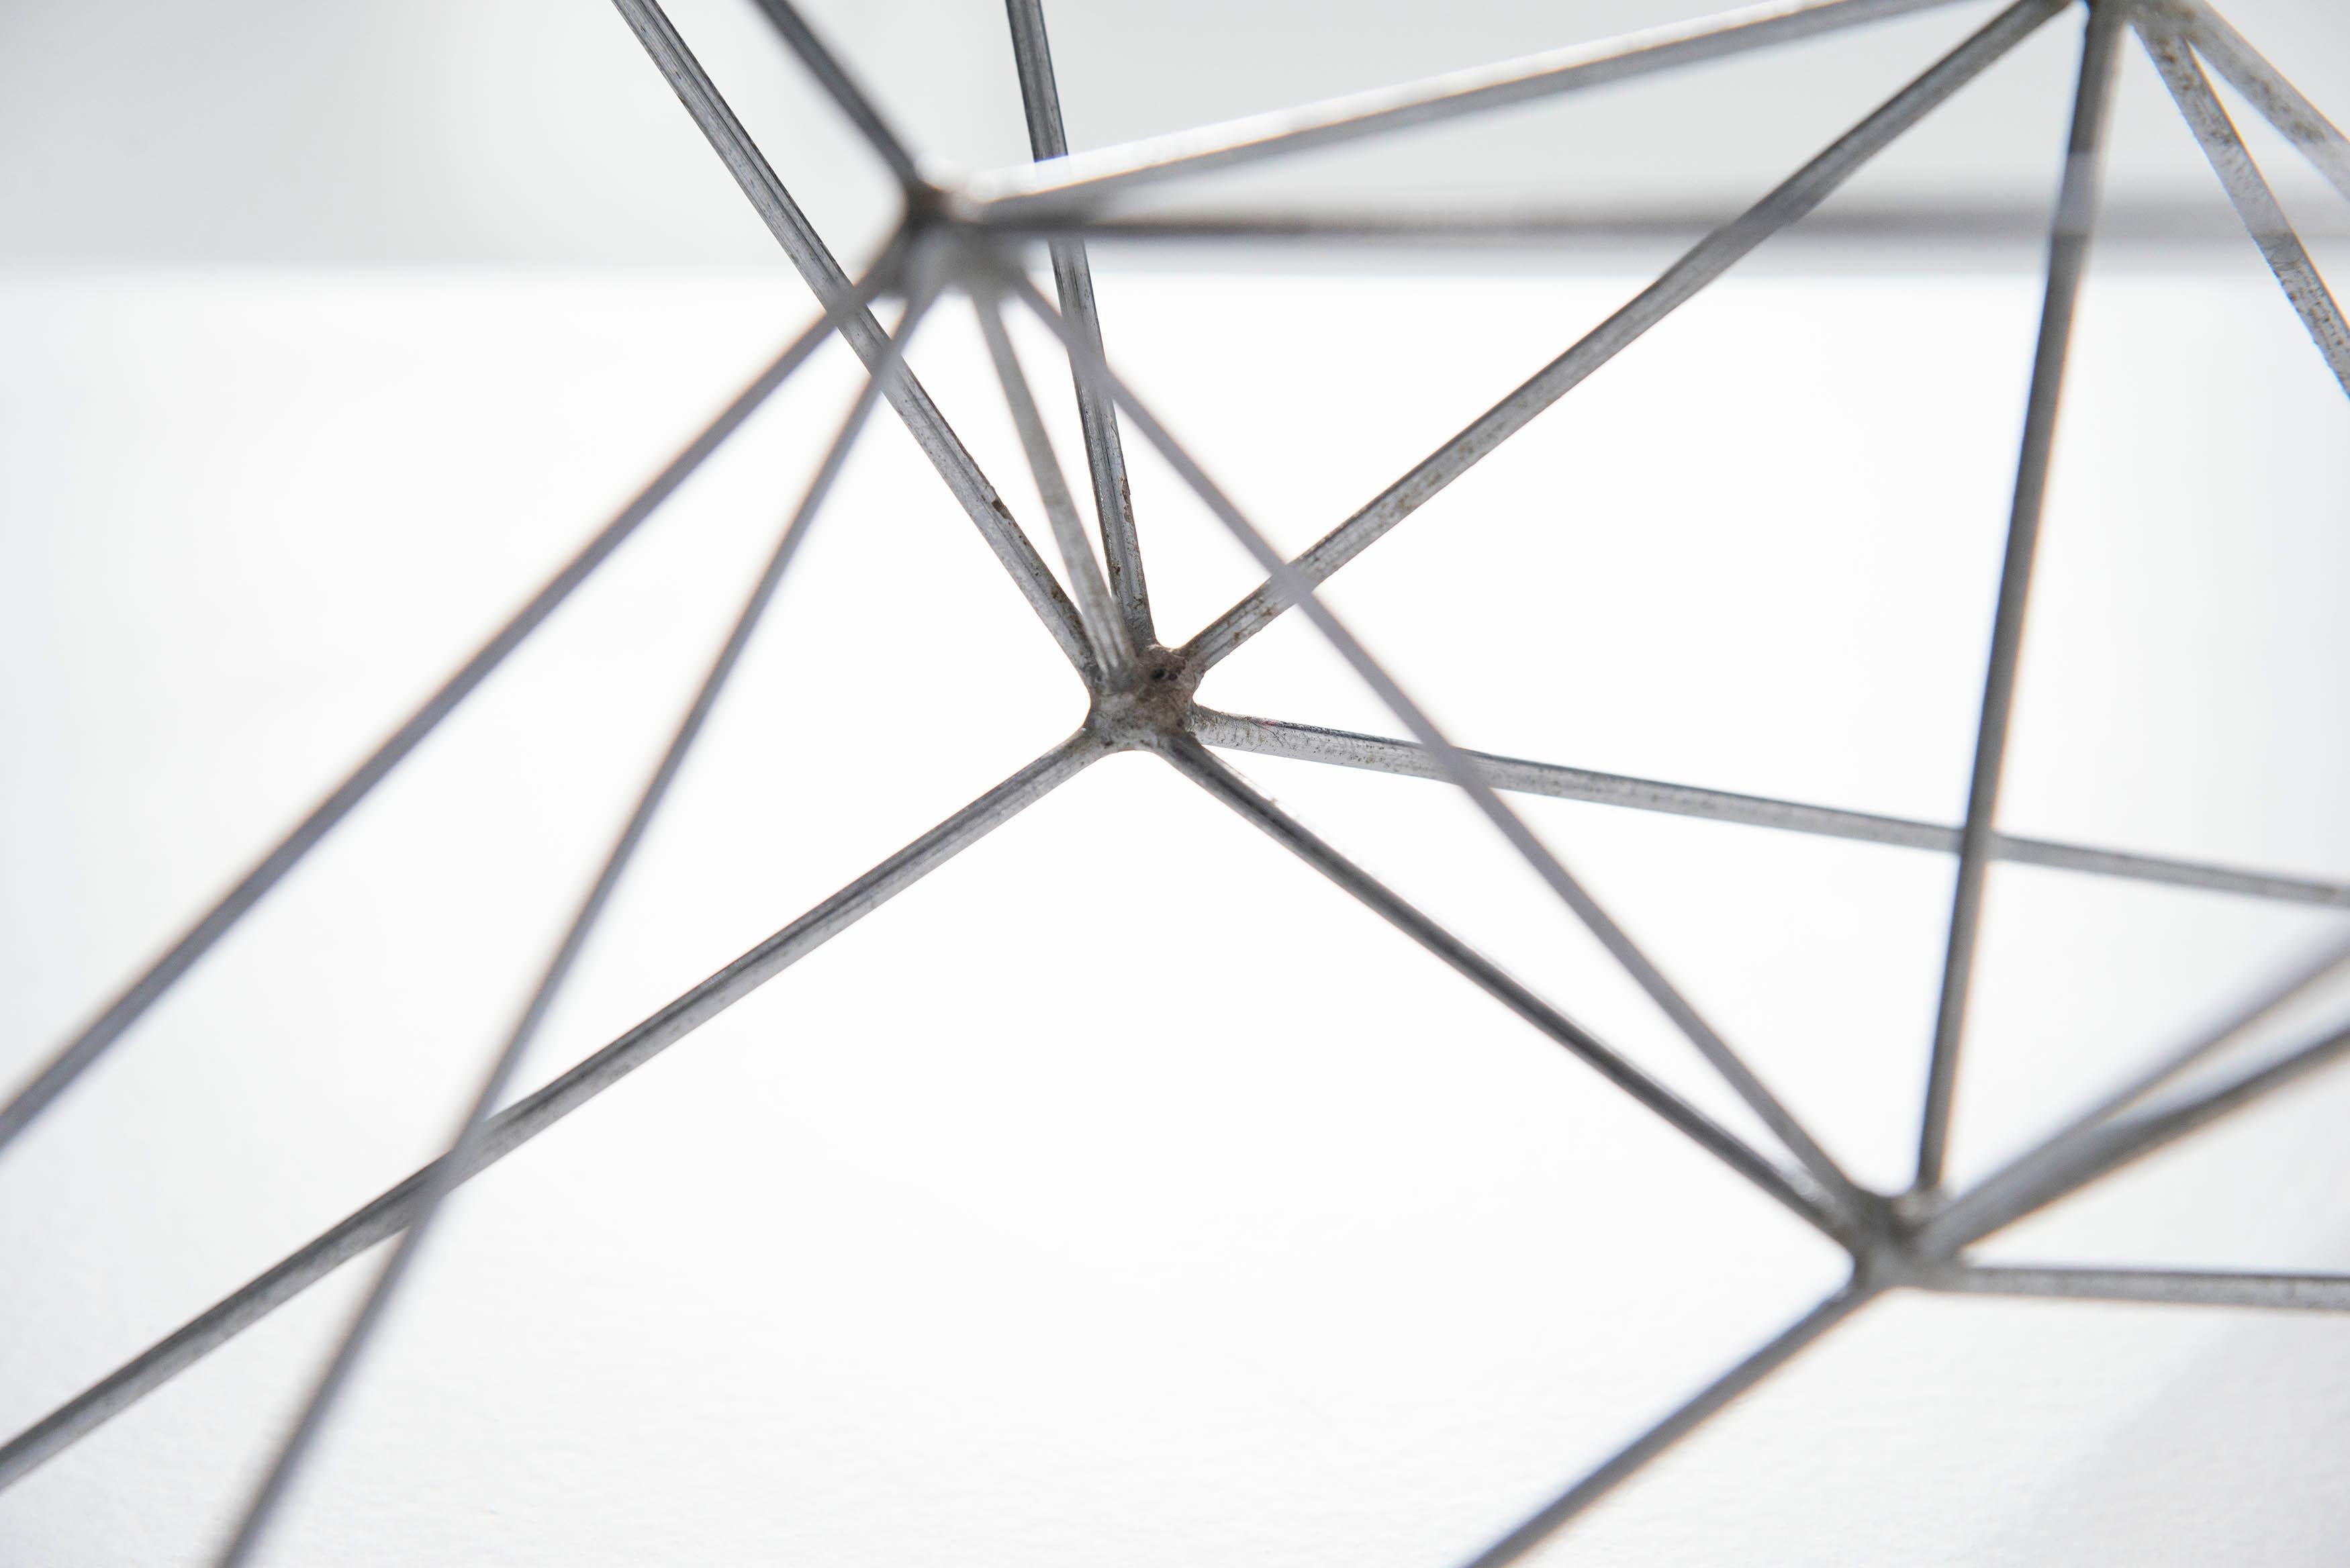 Stainless Steel Rudolf Wolf Geometrical Sculpture, Holland, 1975 For Sale